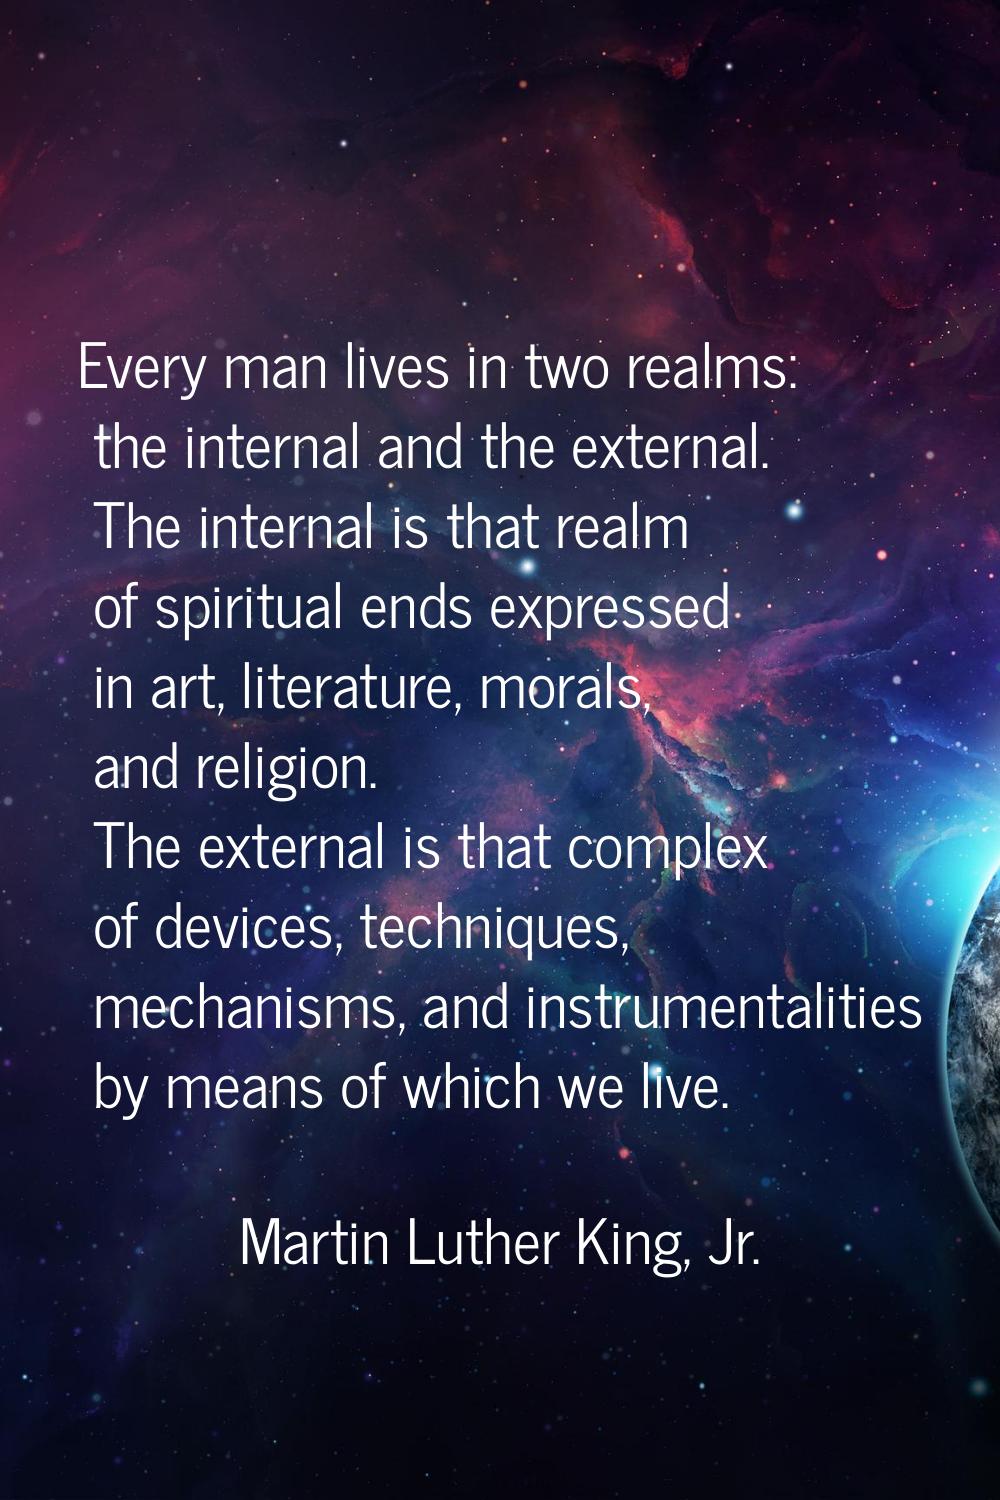 Every man lives in two realms: the internal and the external. The internal is that realm of spiritu